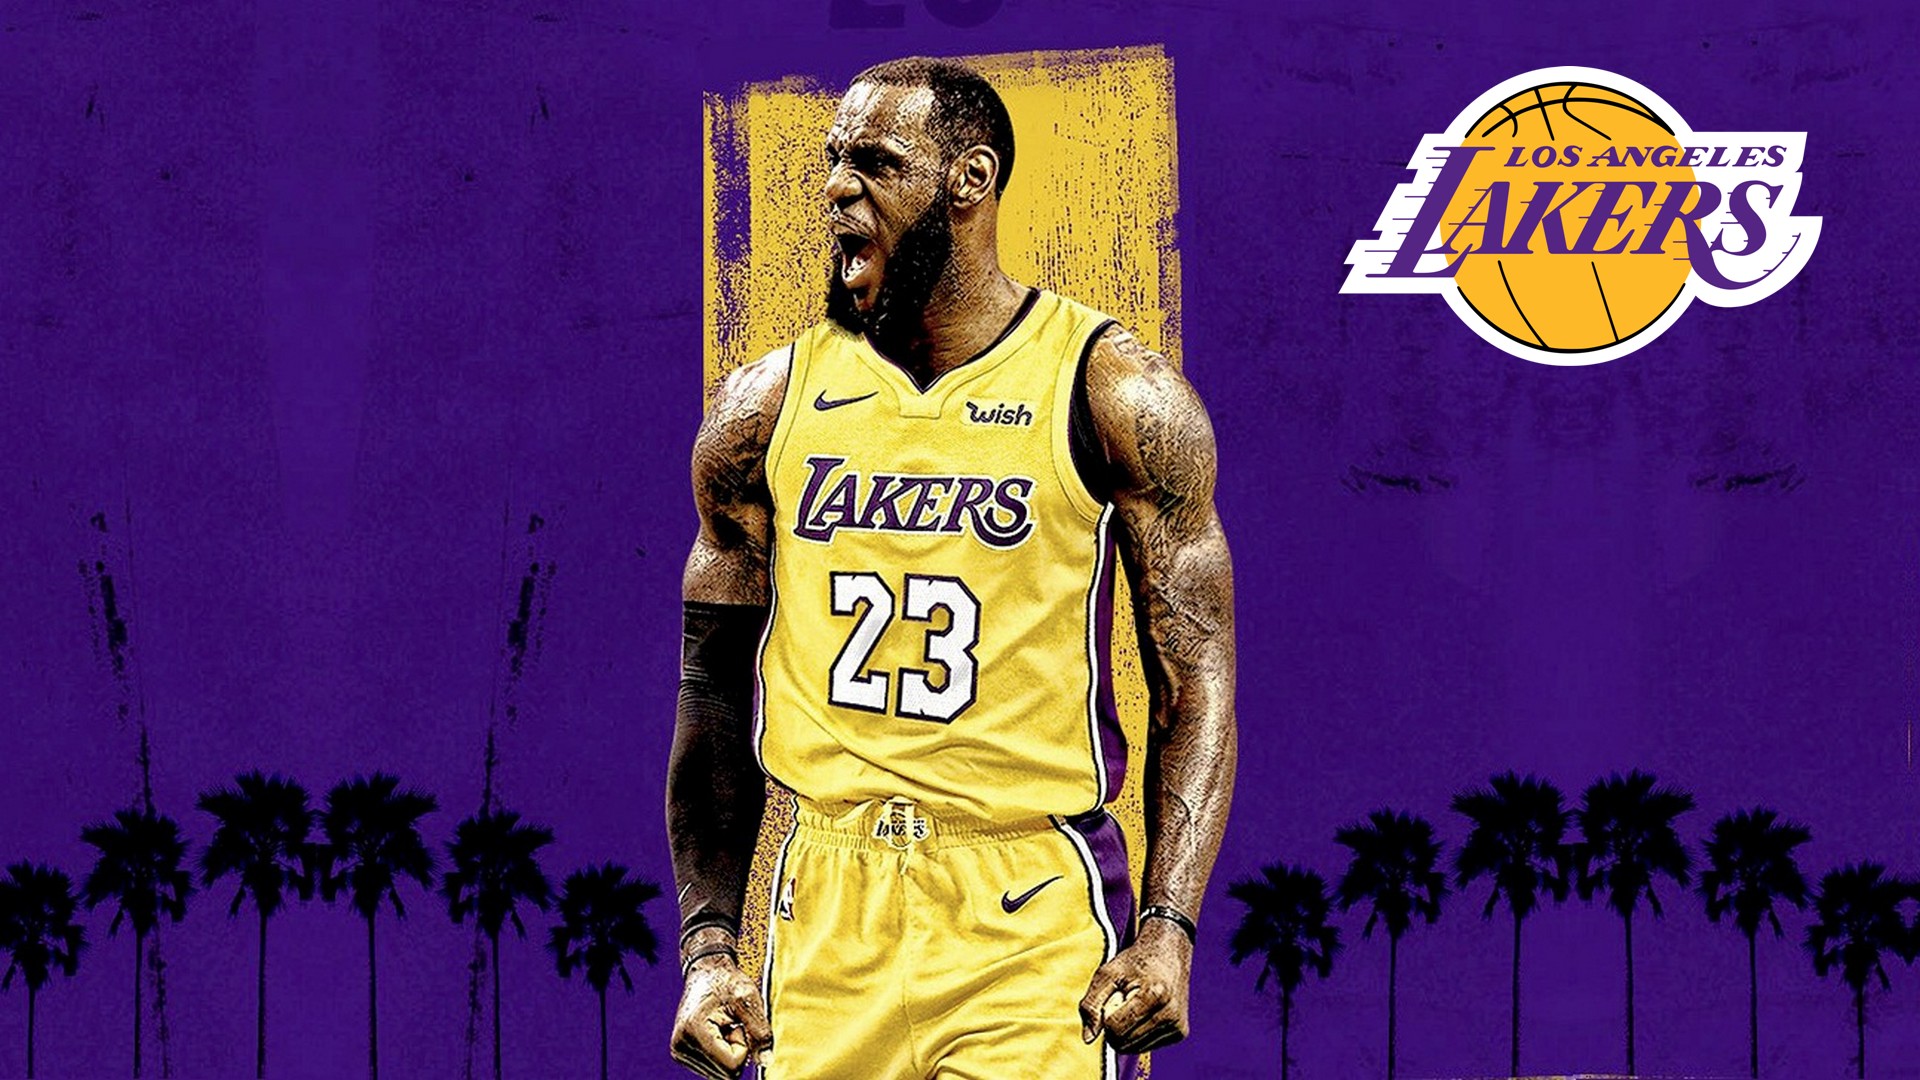 LeBron James Lakers Desktop Wallpapers with image dimensions 1920x1080 pixel. You can make this wallpaper for your Desktop Computer Backgrounds, Windows or Mac Screensavers, iPhone Lock screen, Tablet or Android and another Mobile Phone device